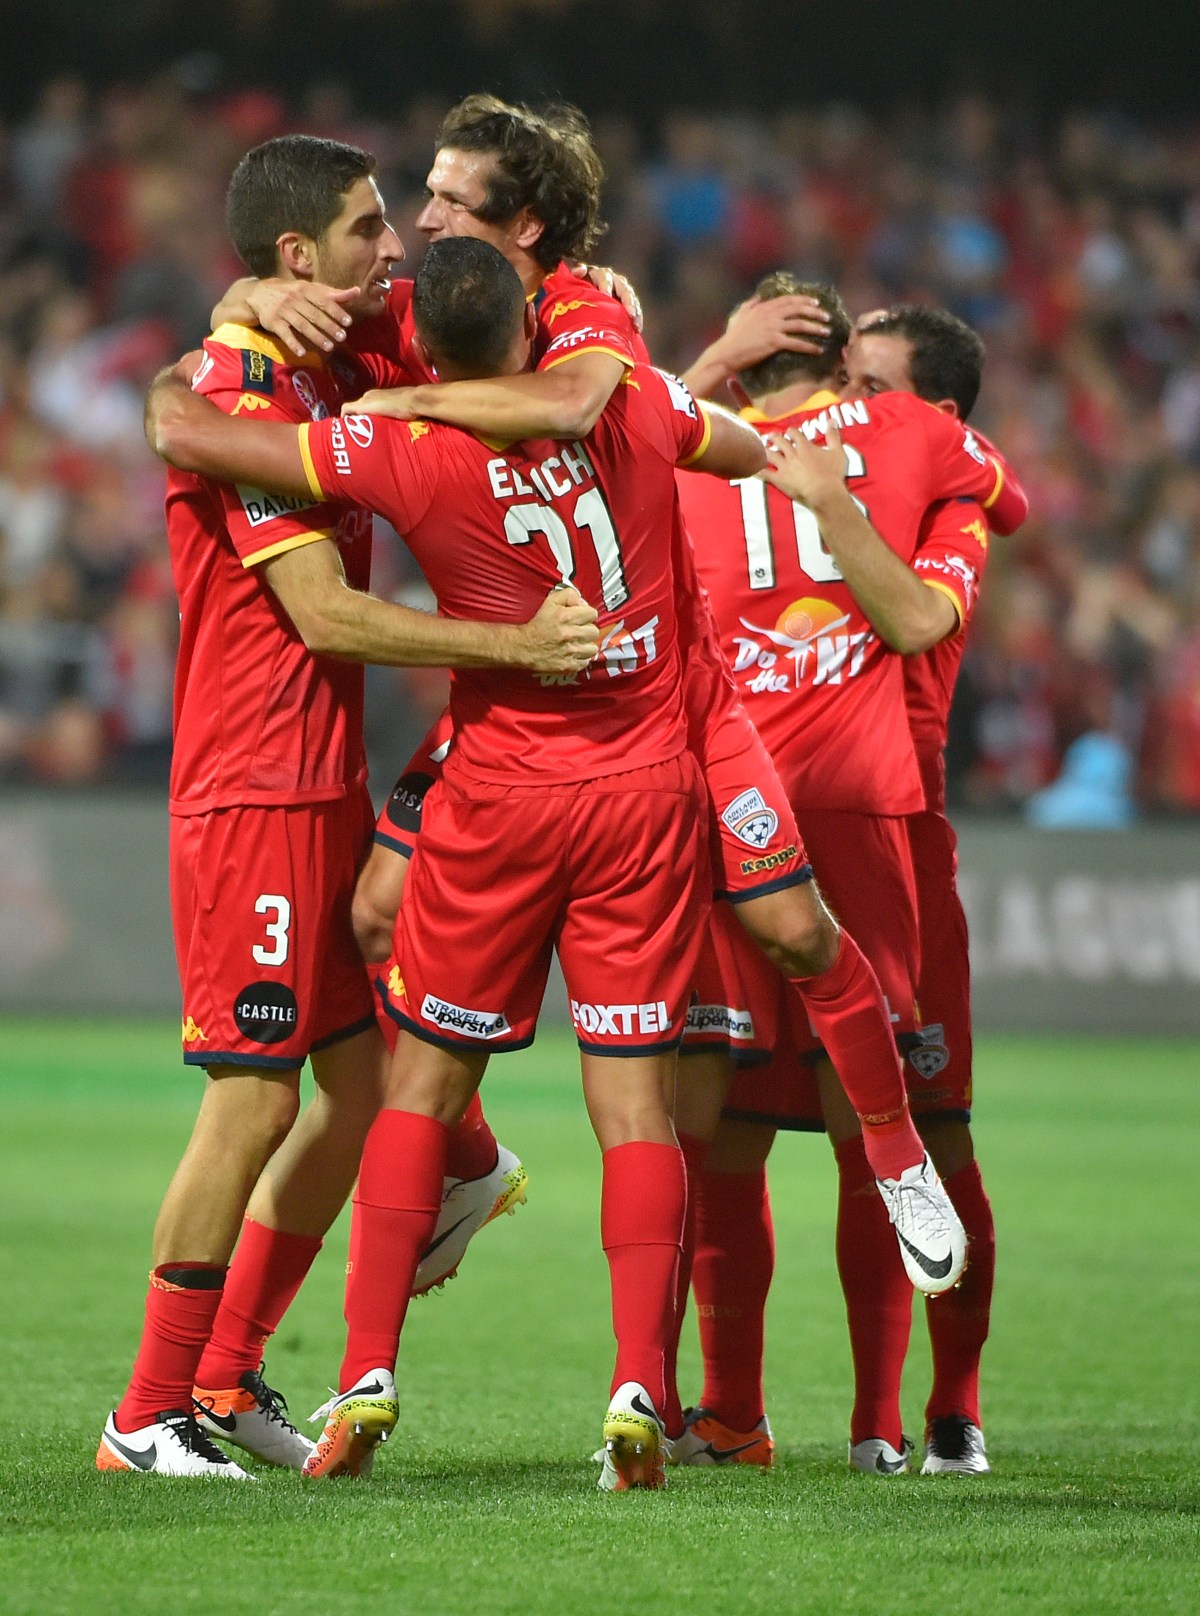 United players celebrate after winning the A-League Grand Final between Adelaide United and the Western Sydney Wanderers at Adelaide Oval in Adelaide, Sunday, May 1, 2016. (AAP Image/David Mariuz) NO ARCHIVING, EDITORIAL USE ONLY